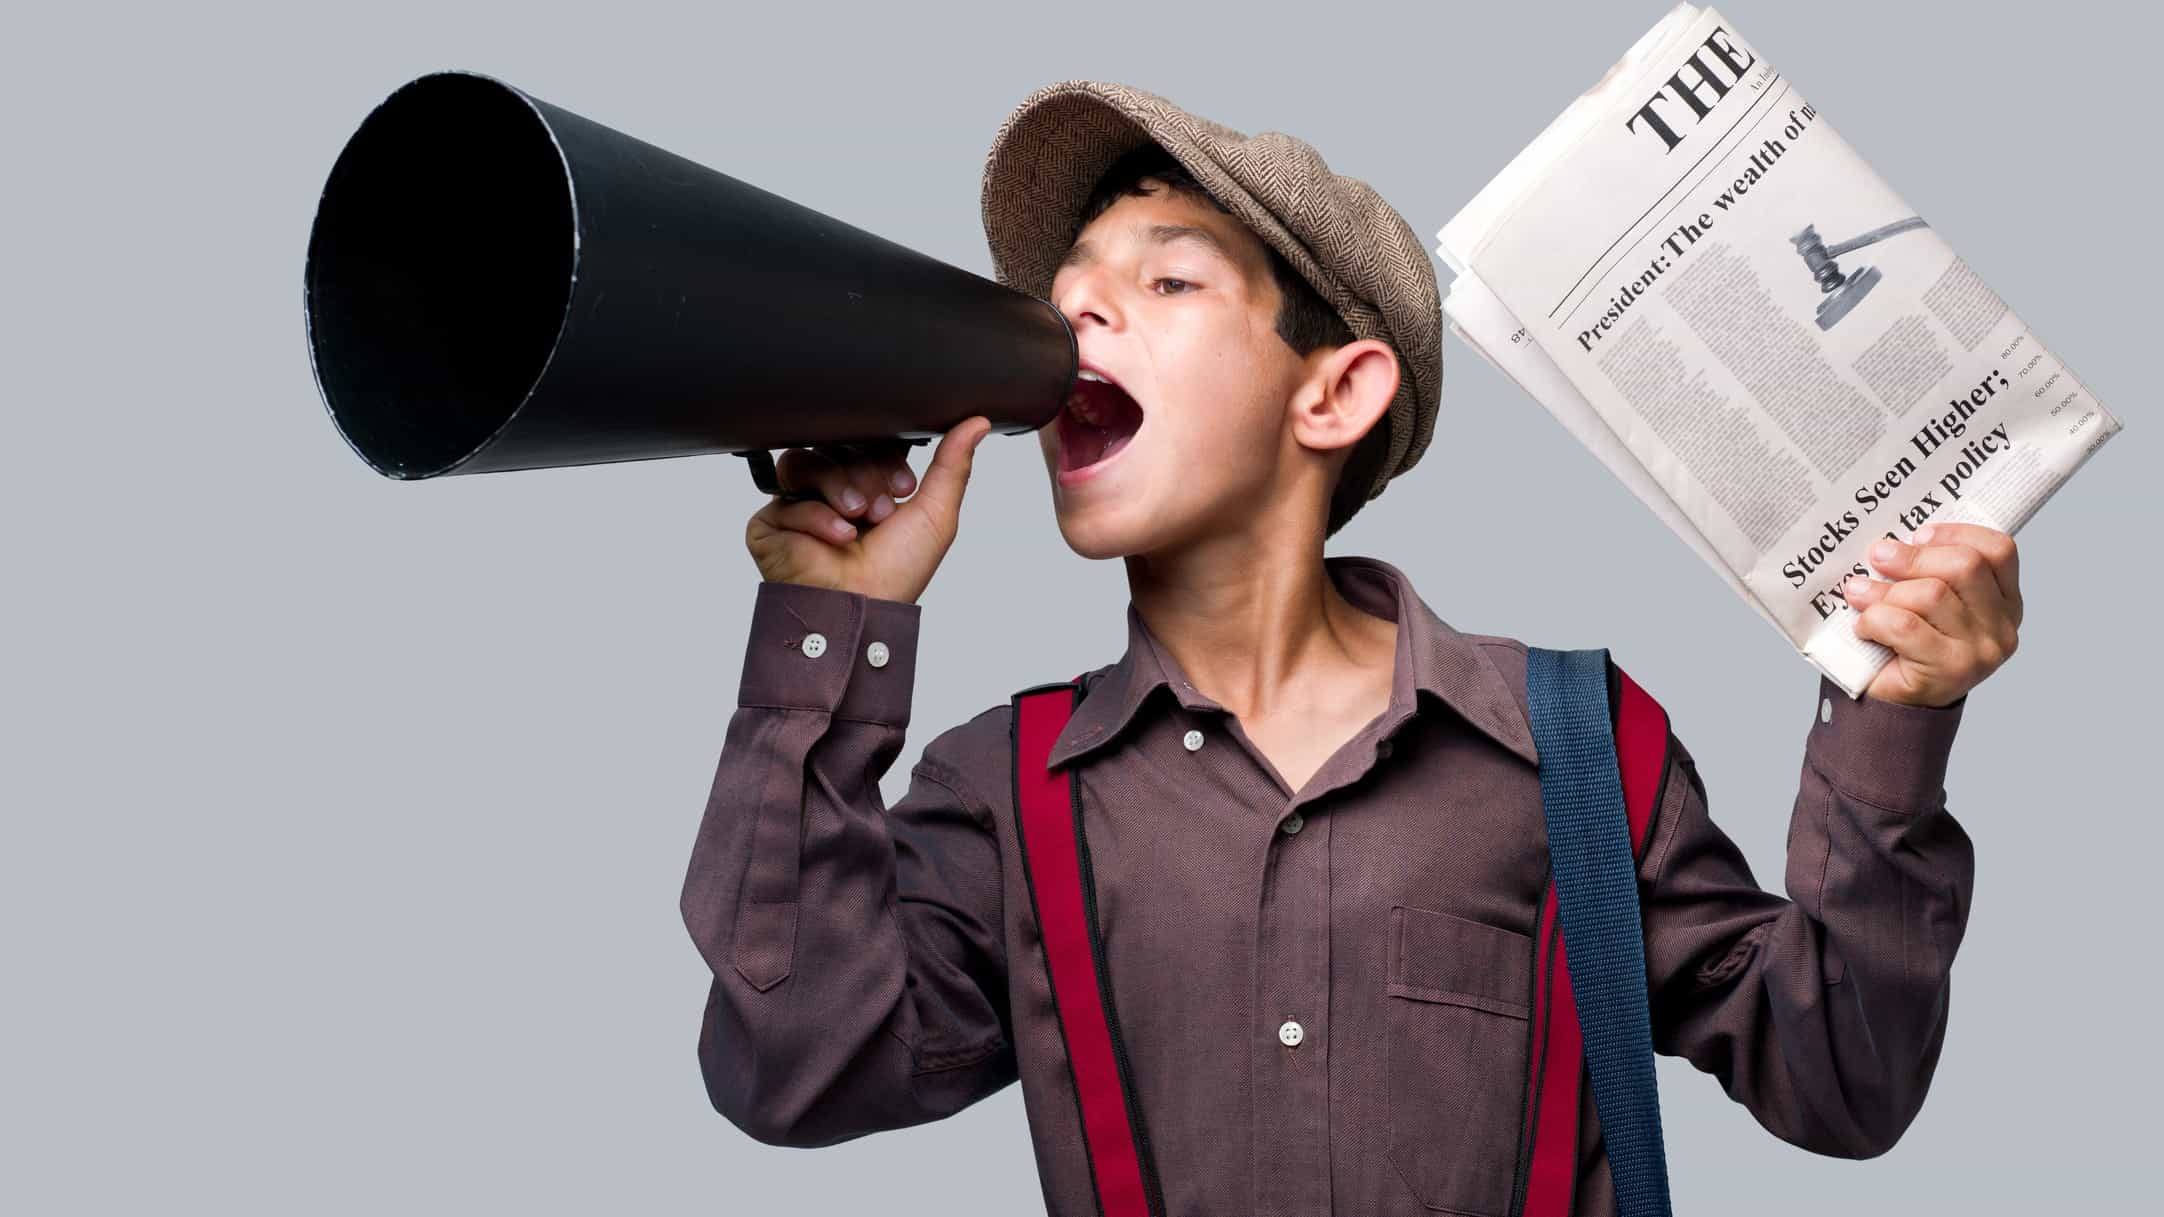 a newsboy wearing historical costume of peaked cap and braces yells into an old fashioned megaphone while holding a newspaper in one hand, a so-called newsboy of previous eras when newsboys sold newspapers on street corners.